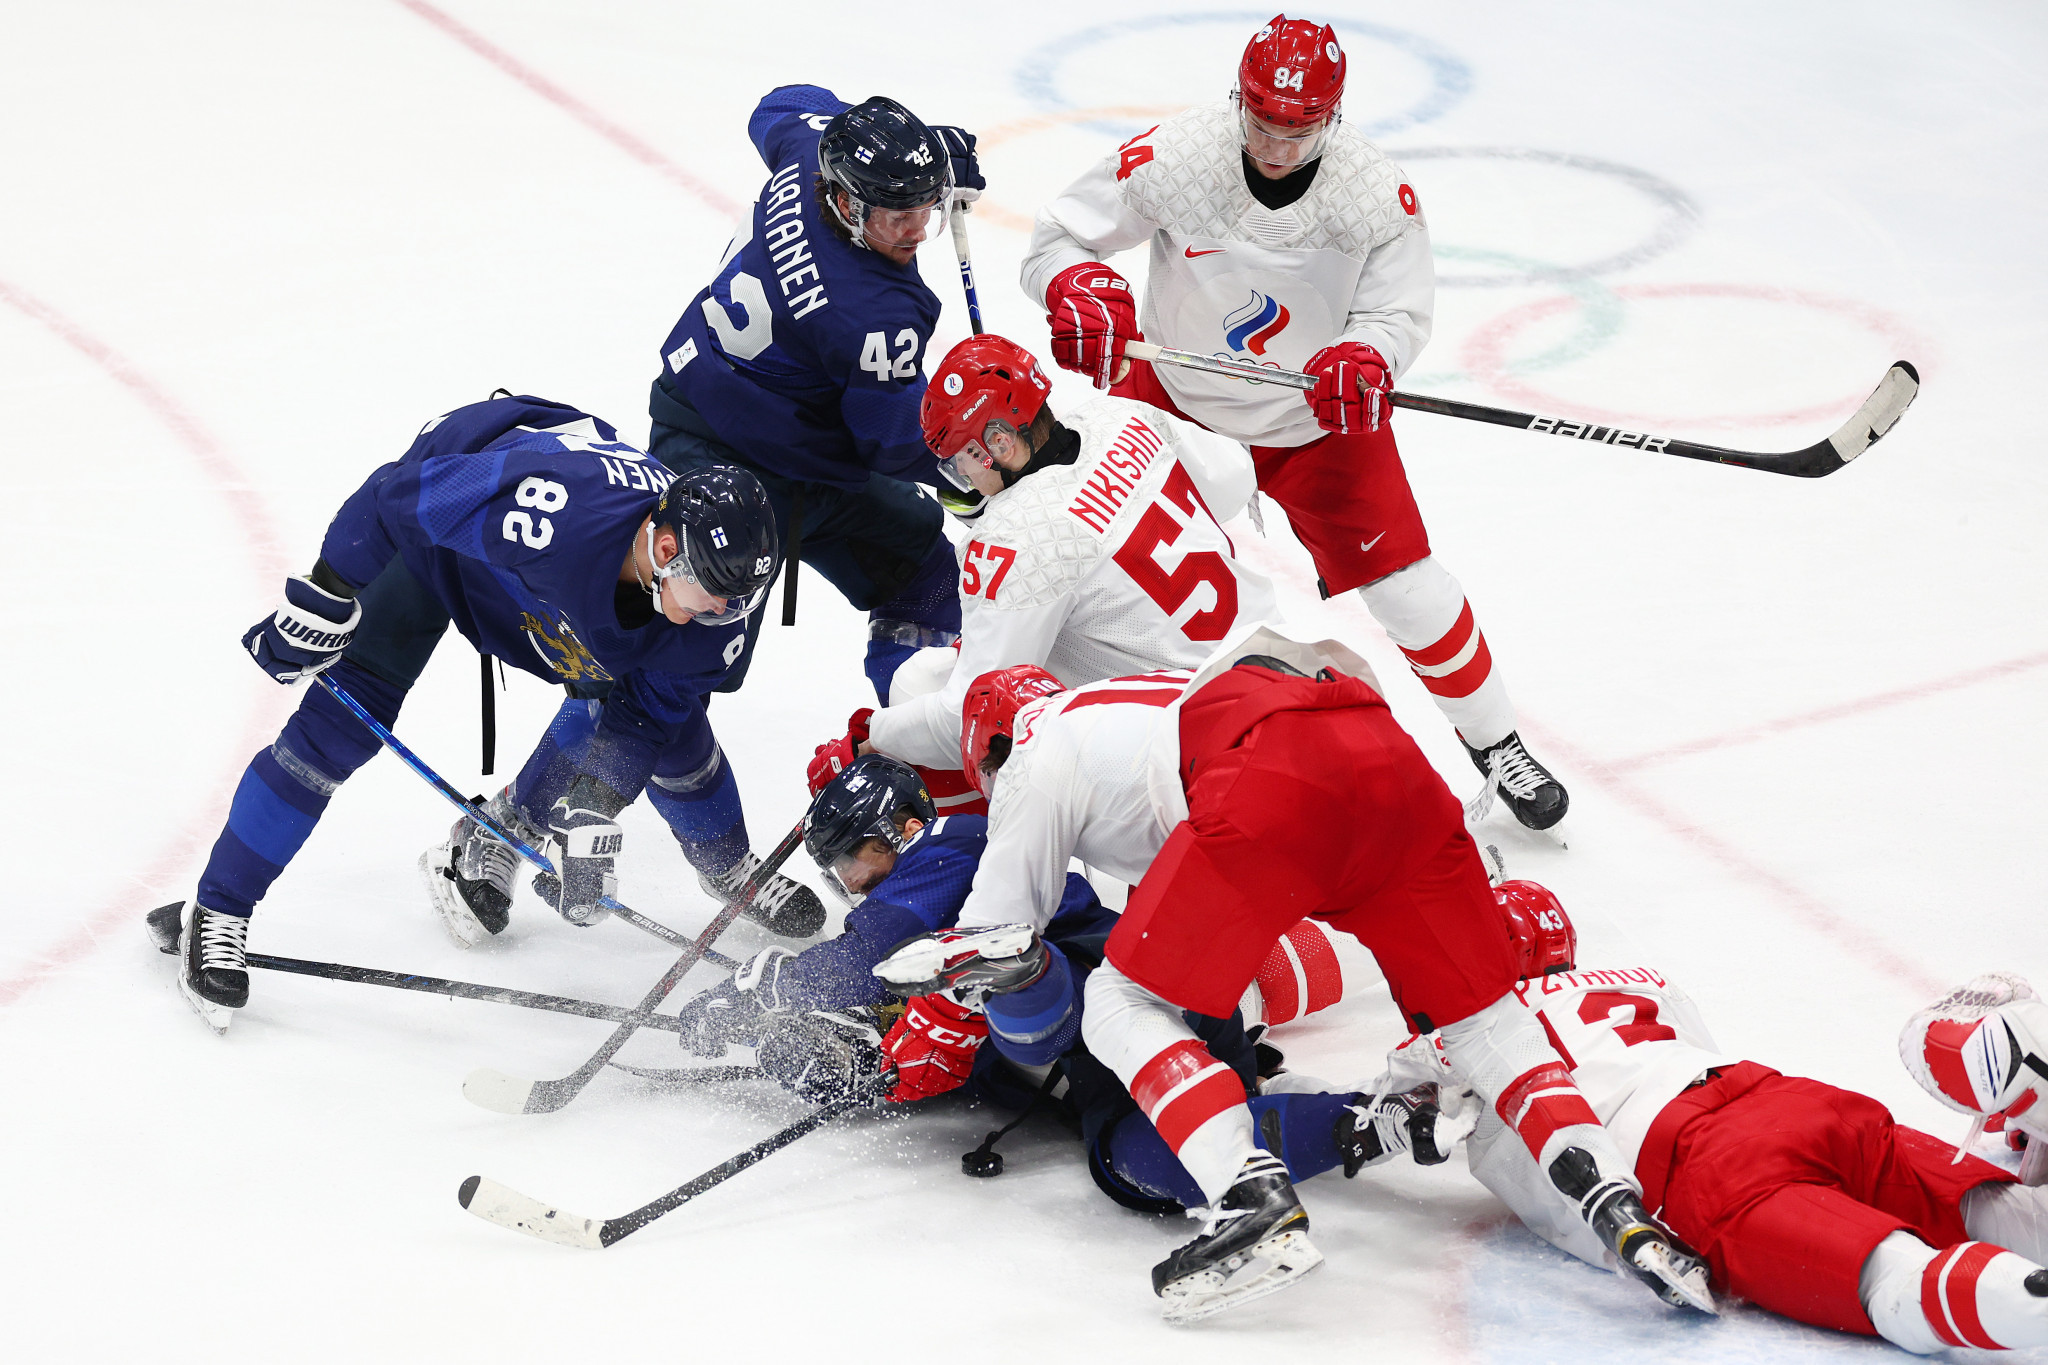 Ice hockey matches are scheduled to be split between the PalaItalia Santa Giulia and the Milano Hockey Arena ©Getty Images